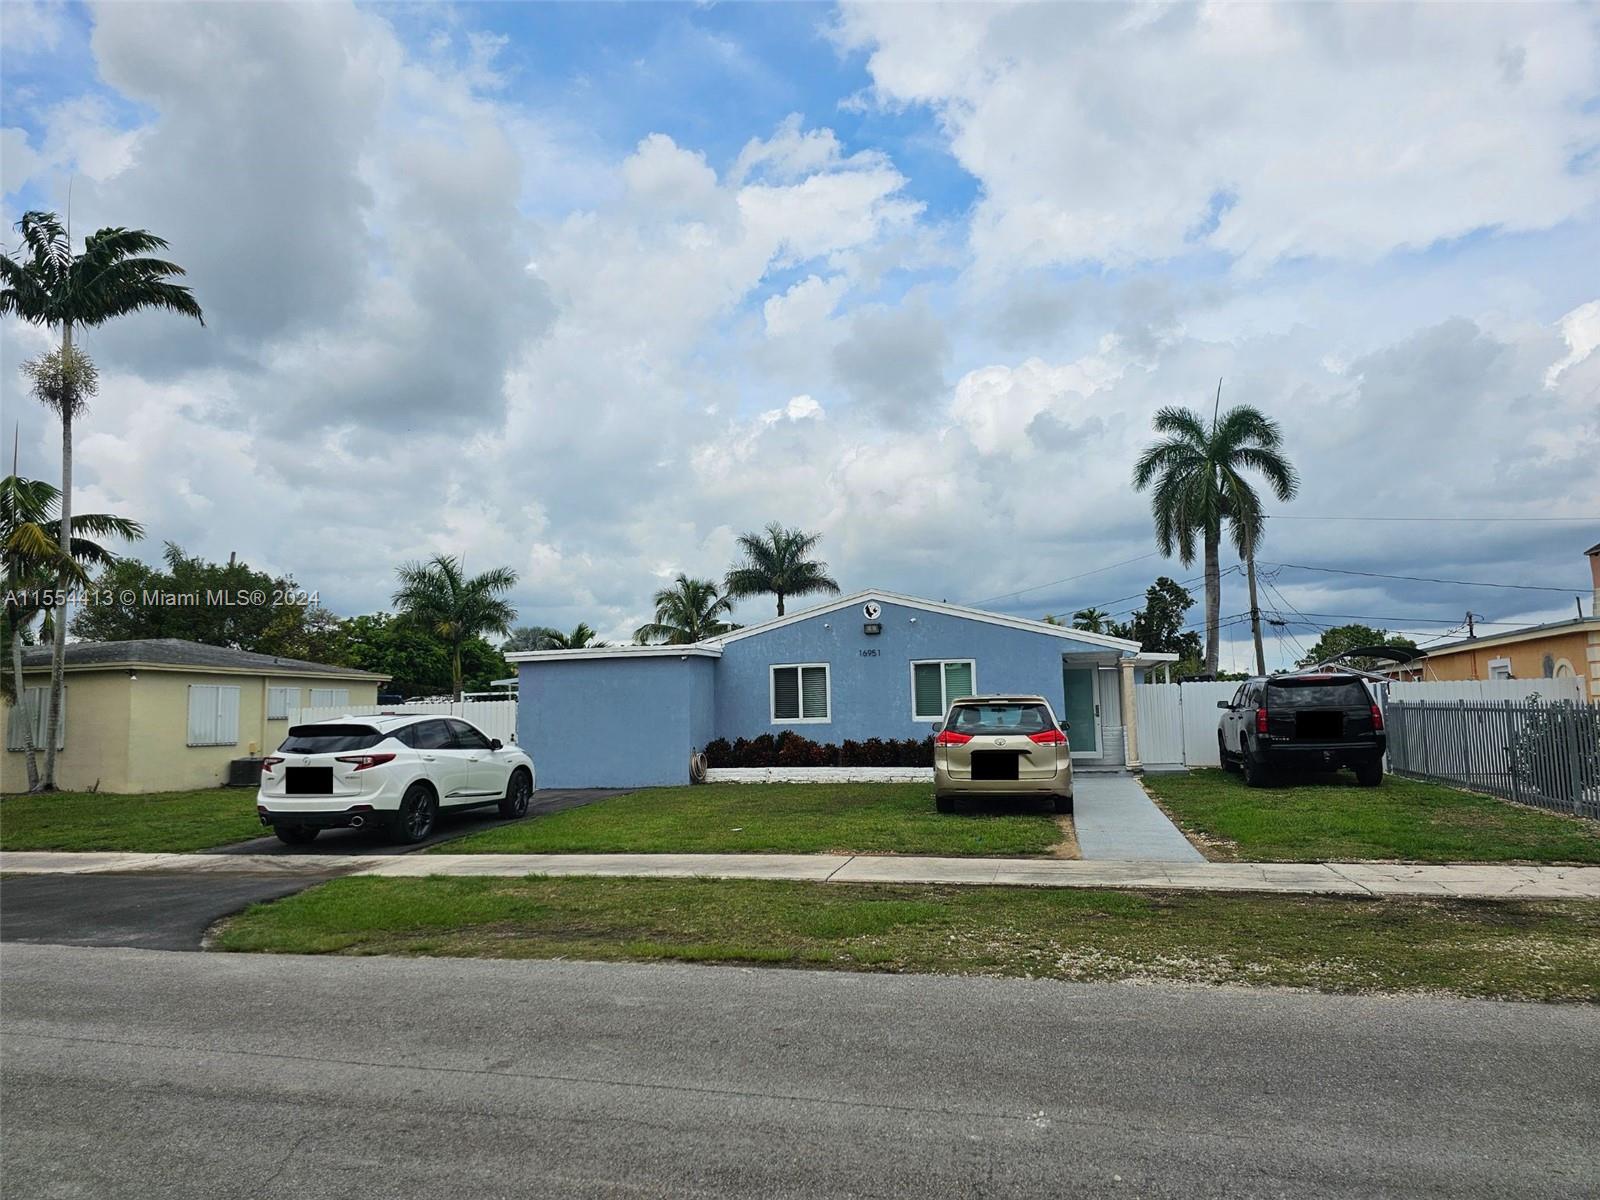 Rental Property at 16951 Sw 303 St, Homestead, Miami-Dade County, Florida -  - $585,000 MO.